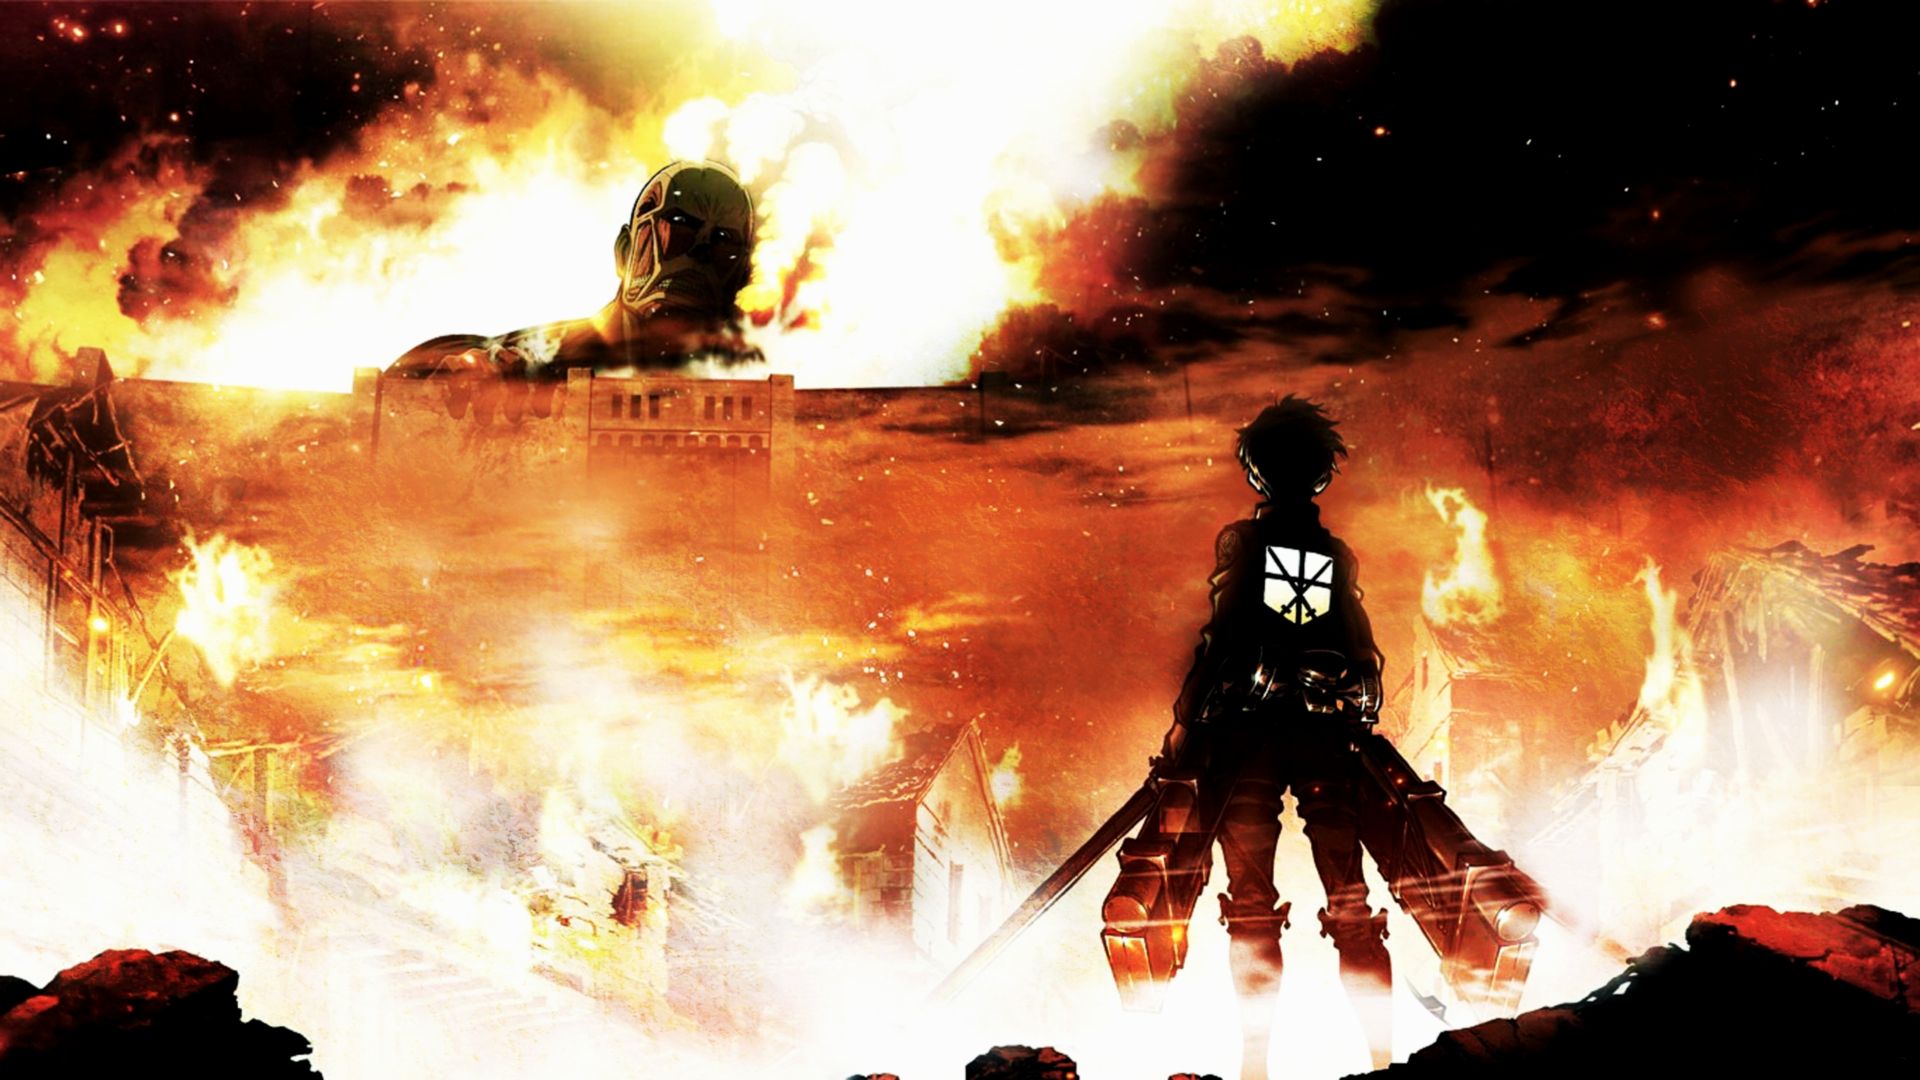 attack on titan wallpaper,explosion,event,cg artwork,pc game,action adventure game